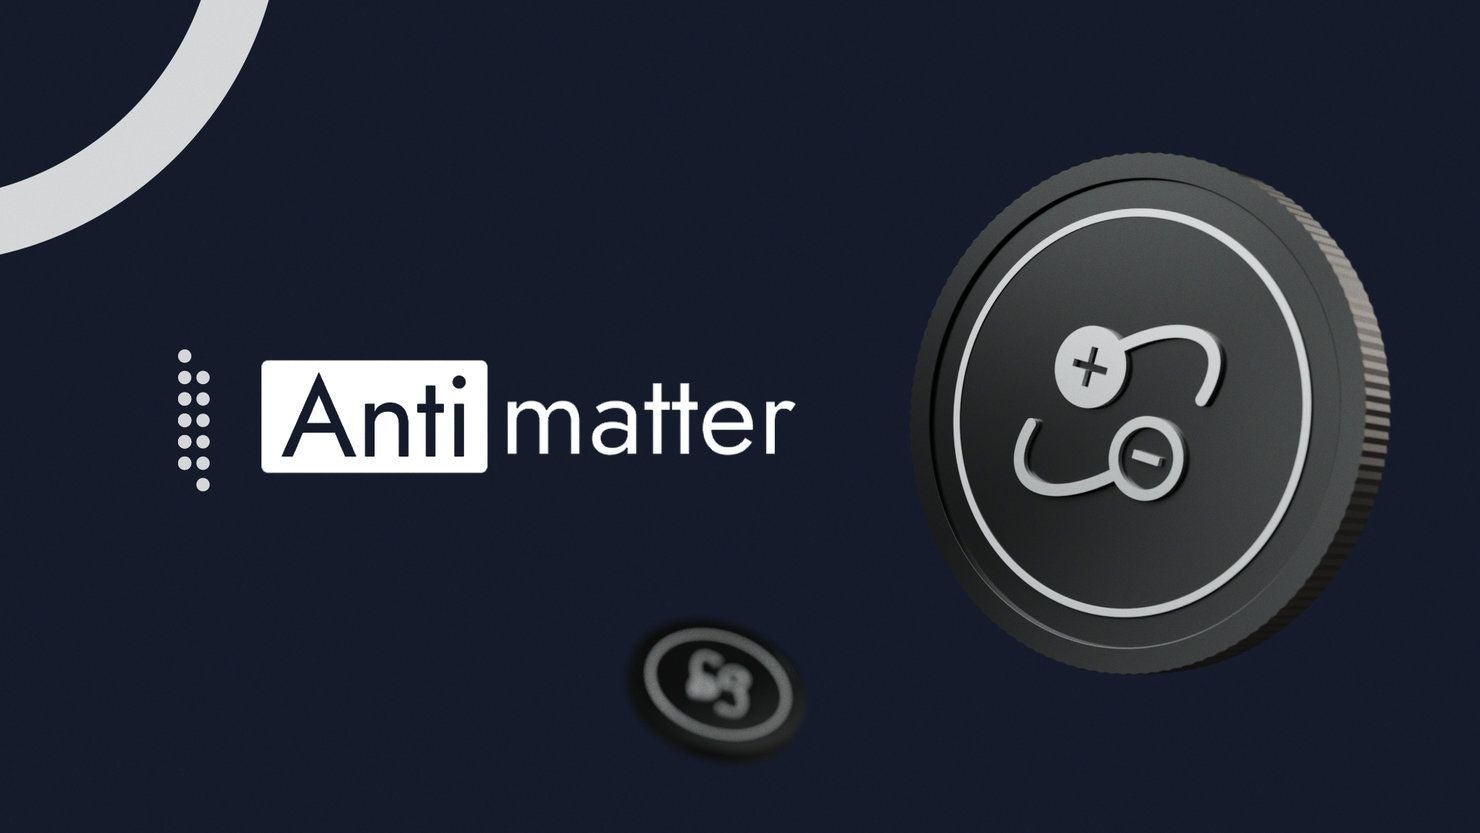 Antimatter Cover Image